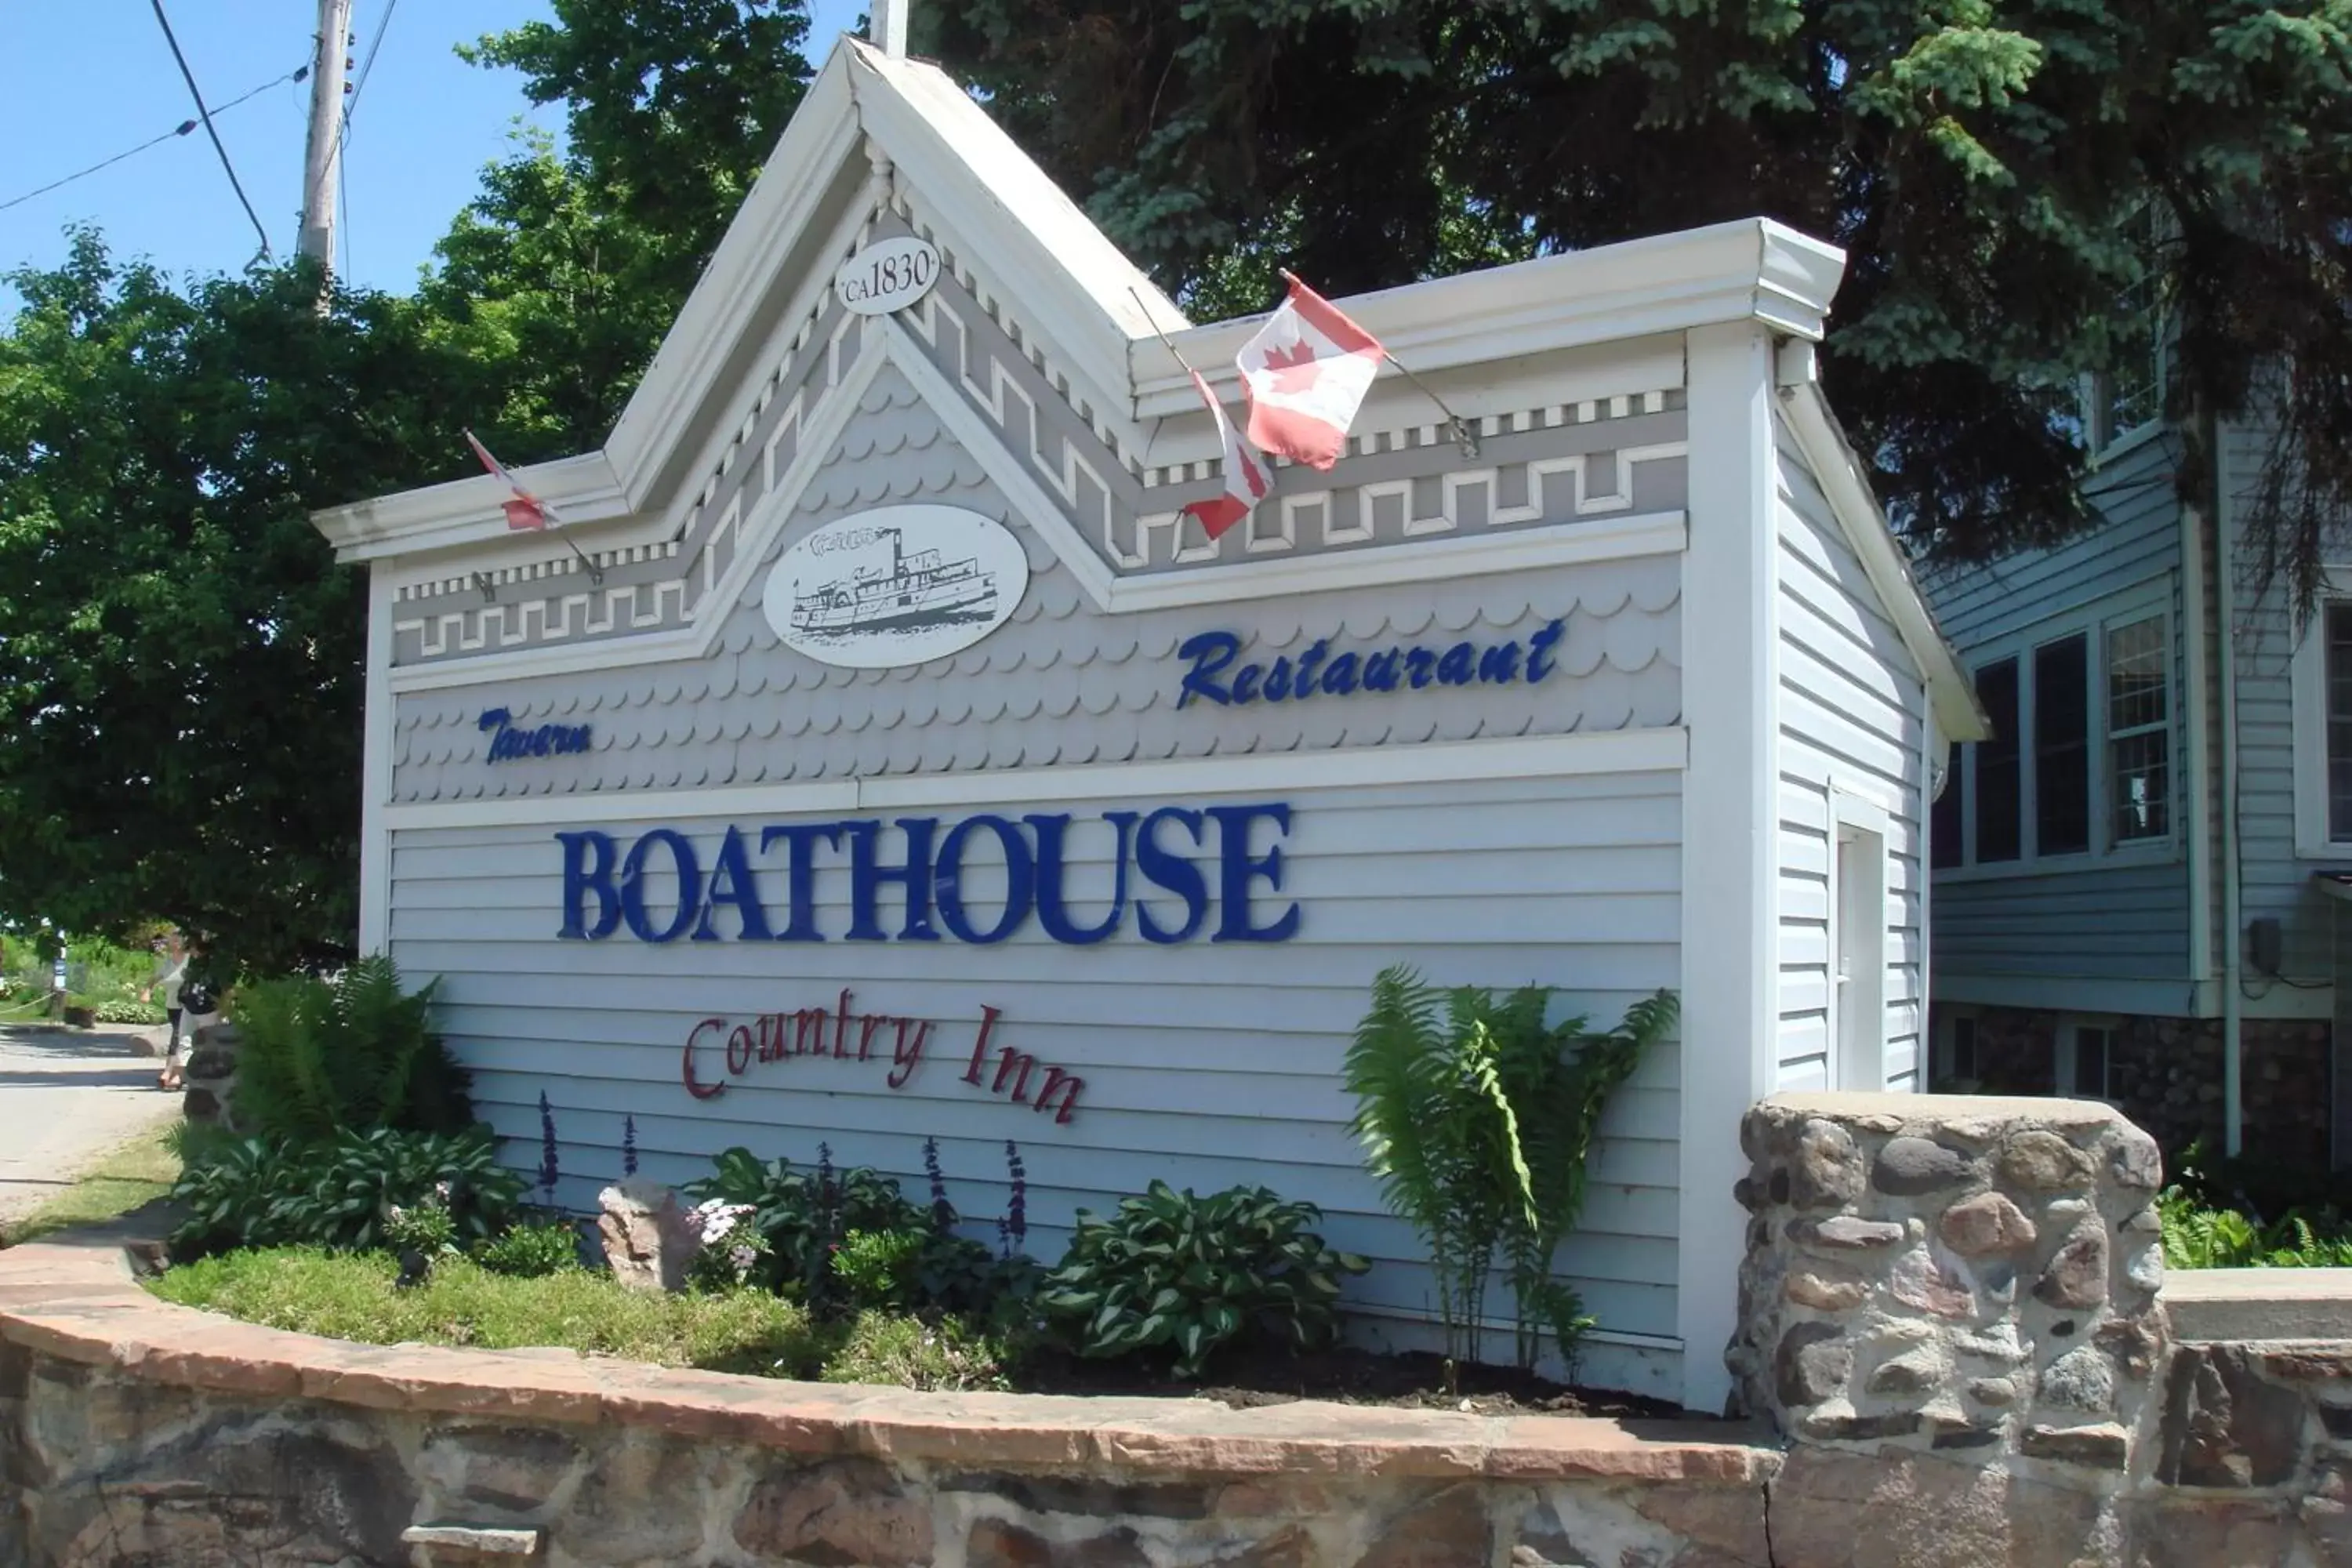 Property Building in Boathouse Country Inn